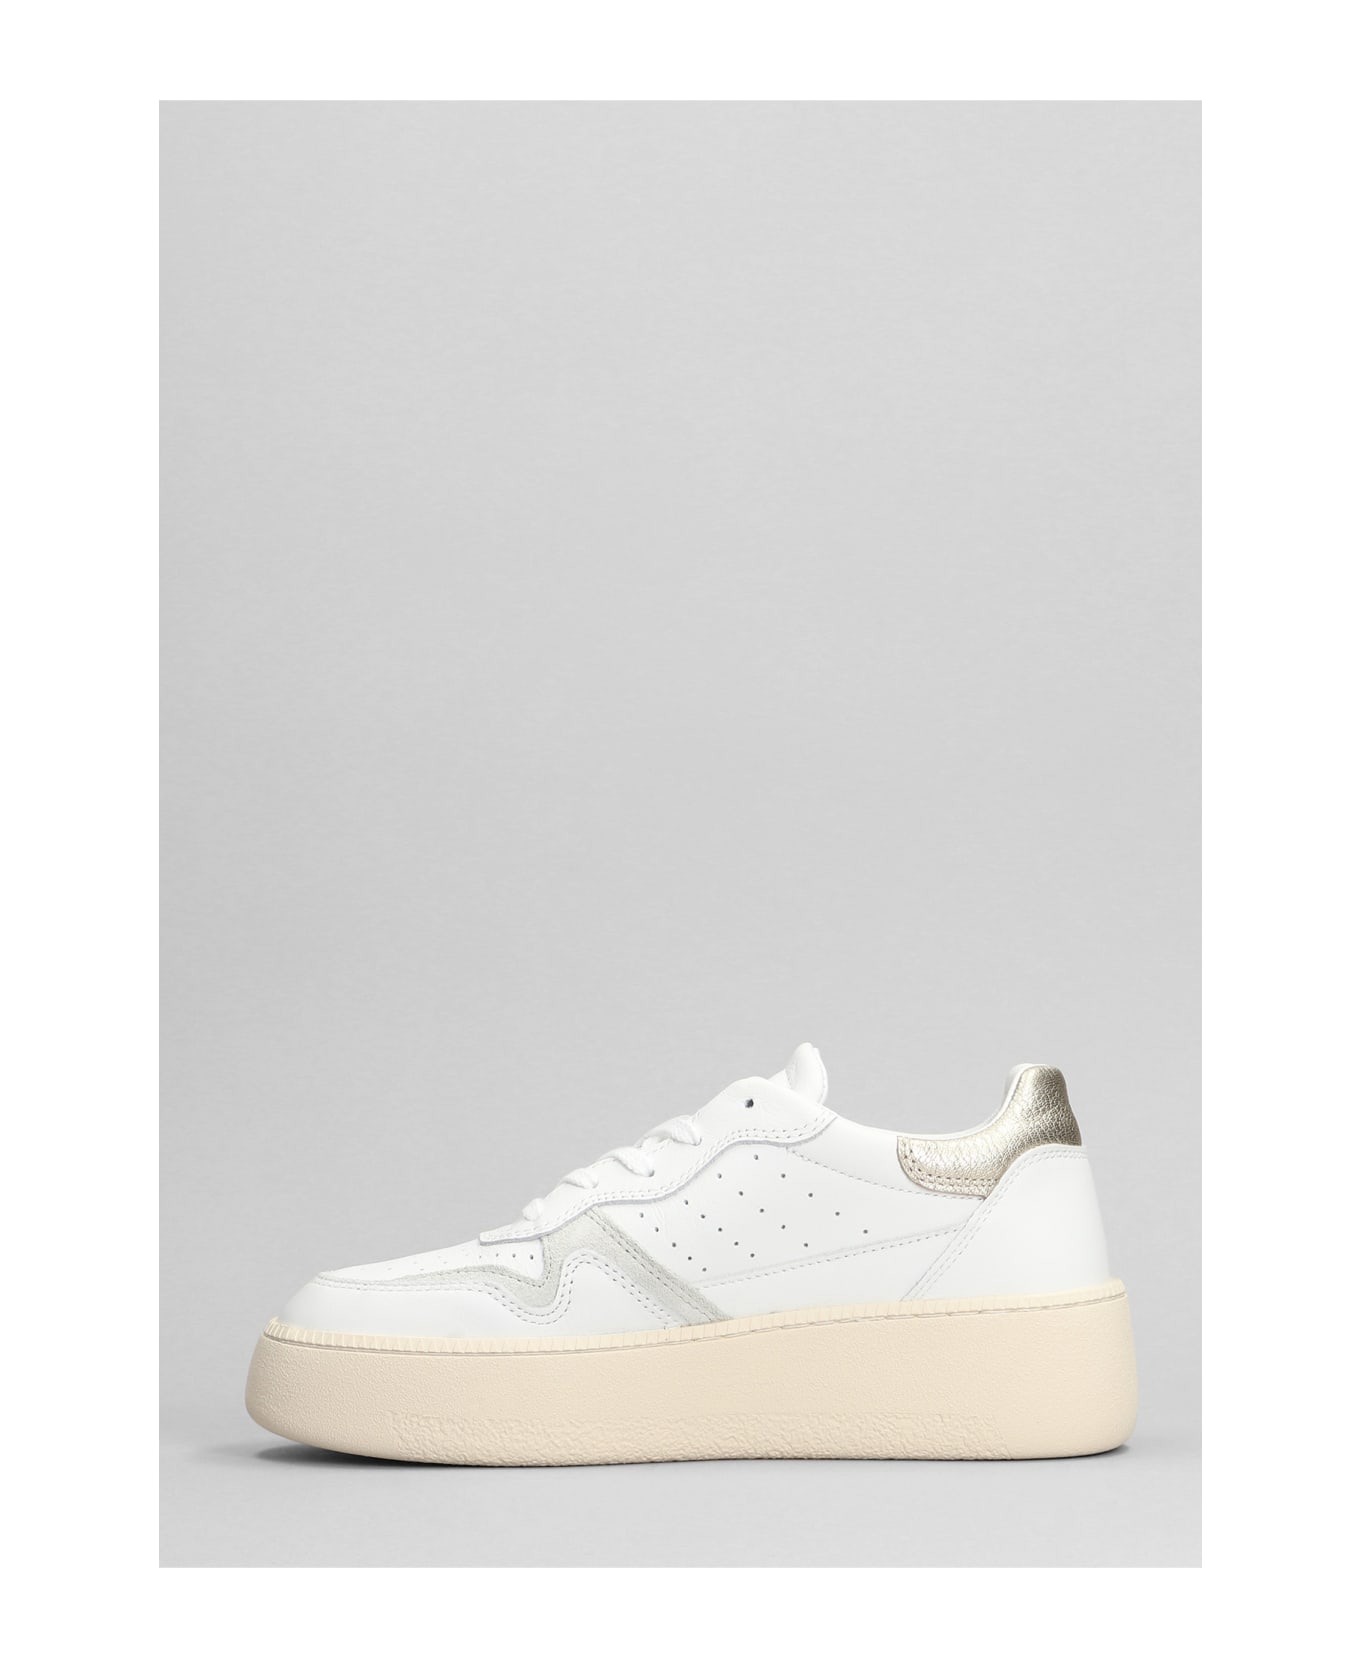 D.A.T.E. Step Sneakers In White Leather - Bianco/Platino